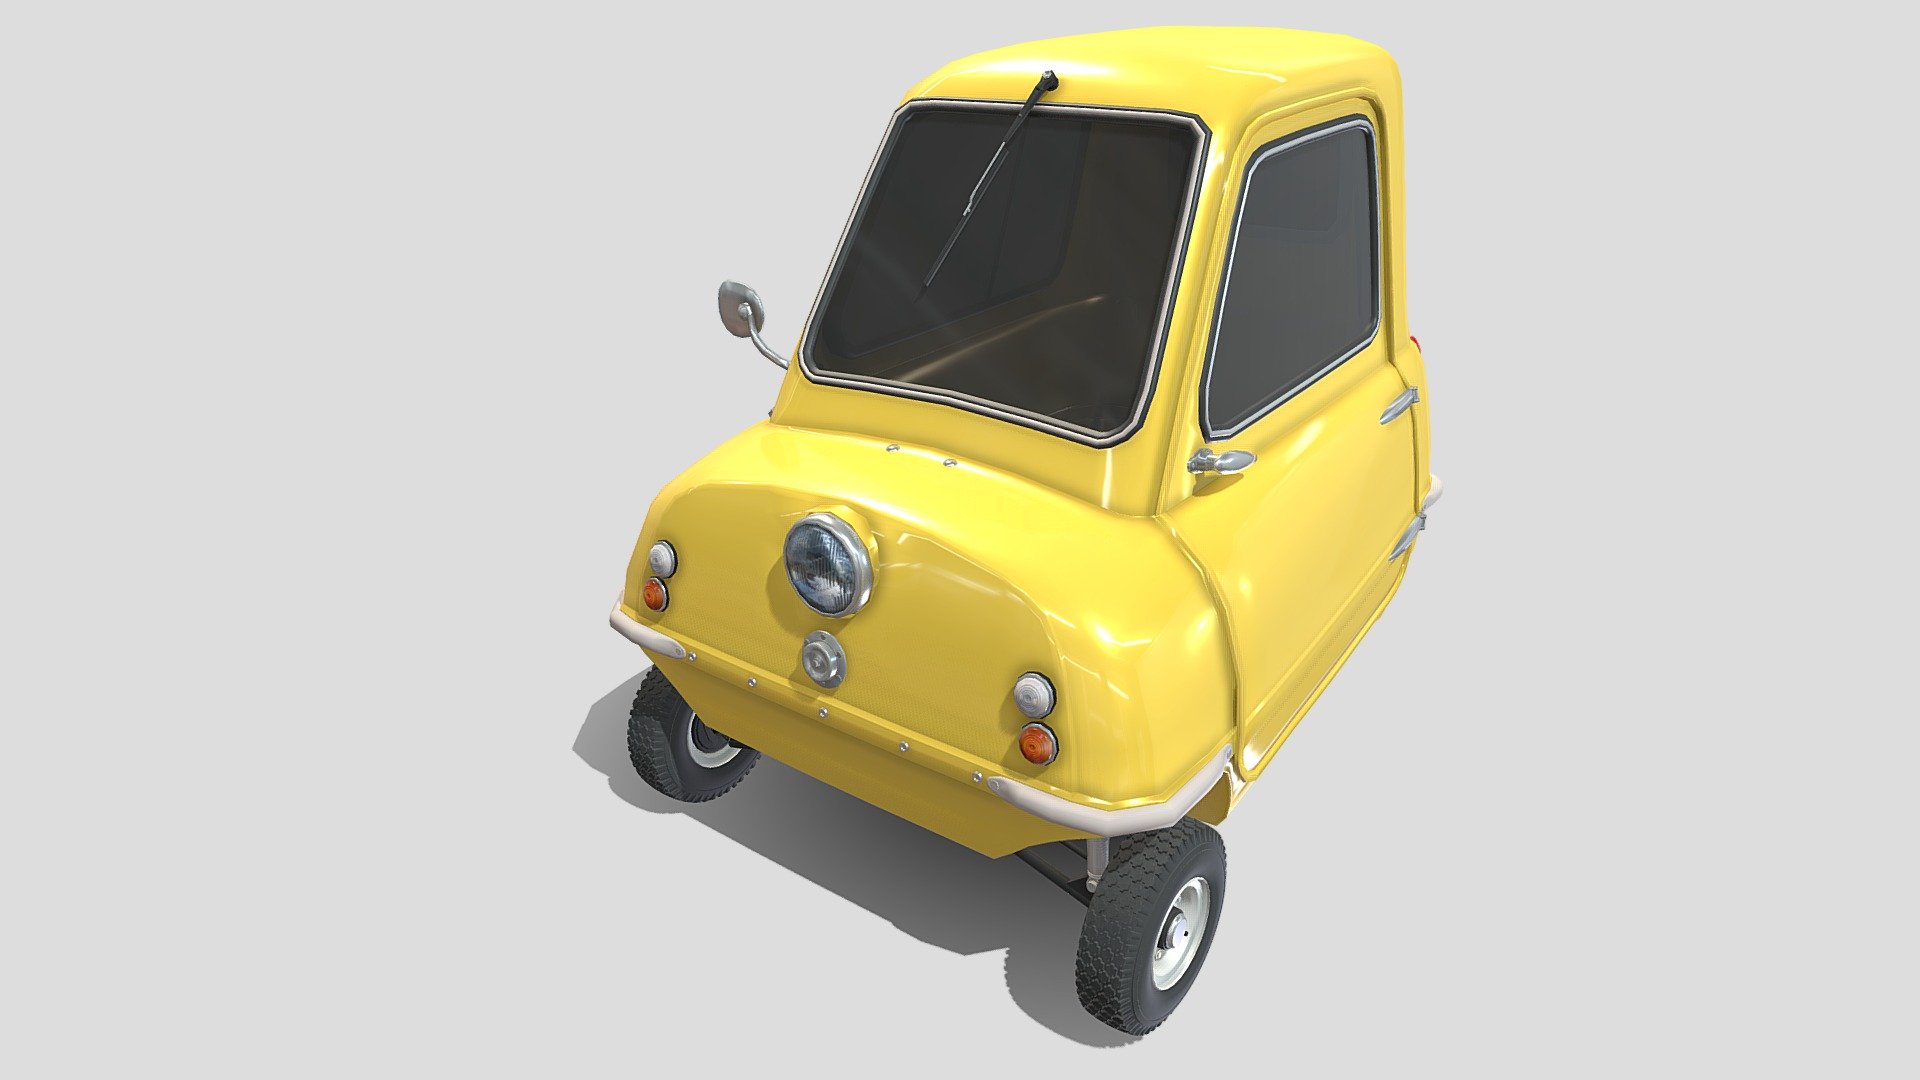 Highly detailed Peel P50 Micro Car with a detailed drivetrain (suspension, chassis, motor, steering, brakes) 3d model rendered with Cycles in Blender, as per seen on attached images. 
The 3d model is scaled to original size in Blender.

File formats:
-.blend, rendered with cycles, as seen in the images;
-.blend, with a seethrough of the chassis and drivetrain, rendered with cycles, as seen in the images;
-.obj, with materials applied;
-.dae, with materials applied;
-.fbx, with materials applied;
-.stl;

Files come named appropriately and split by file format.

3D Software:
The 3D model was originally created in Blender 2.8 and rendered with Cycles.

Materials and textures:
The models have materials applied in all formats, and are ready to import and render.
The models come with one png texture.

Preview scenes:
The preview images are rendered in Blender using its built-in render engine &lsquo;Cycles'.
Note that the blend files come directly with the rendering scene included and the render command will - Peel P50 Yellow with chassis - Buy Royalty Free 3D model by dragosburian 3d model